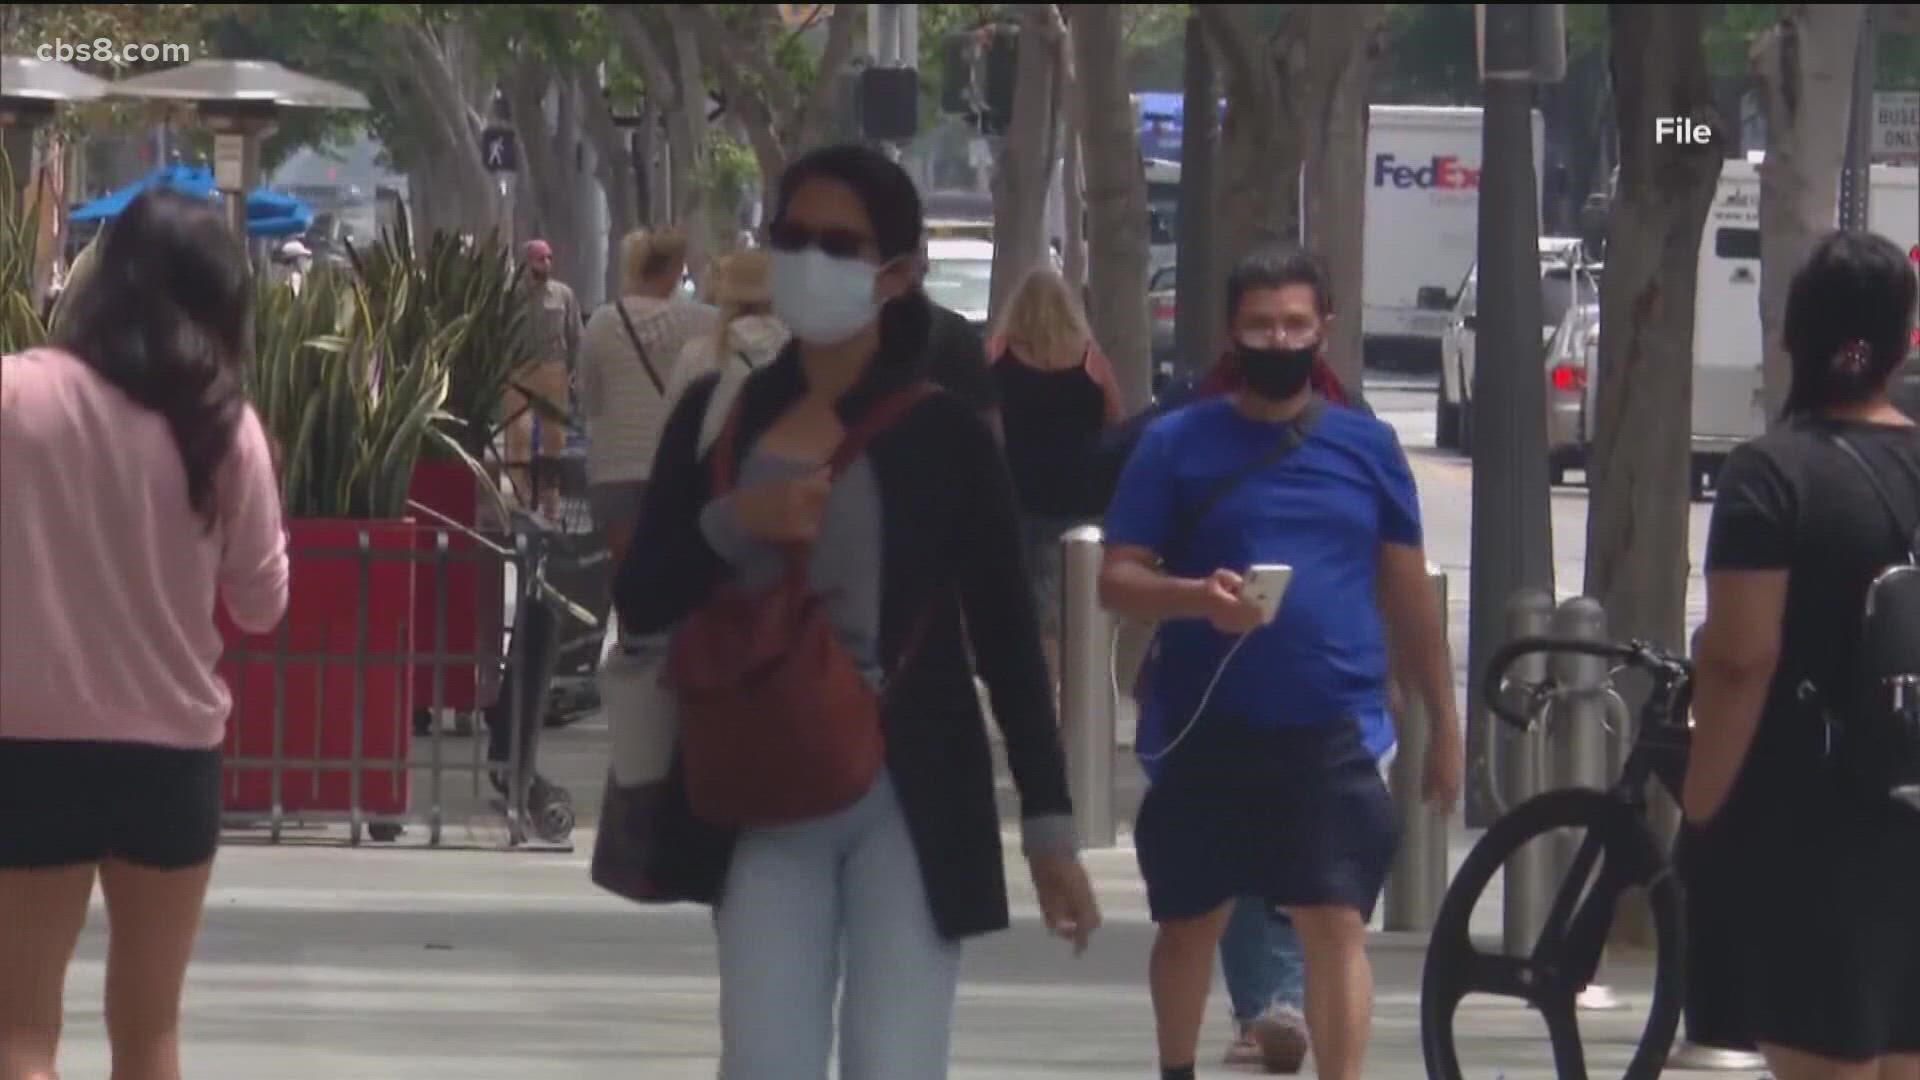 The mayors in the cities of El Cajon and Coronado have both said publicly that they will not enforce the mandatory mask mandate.